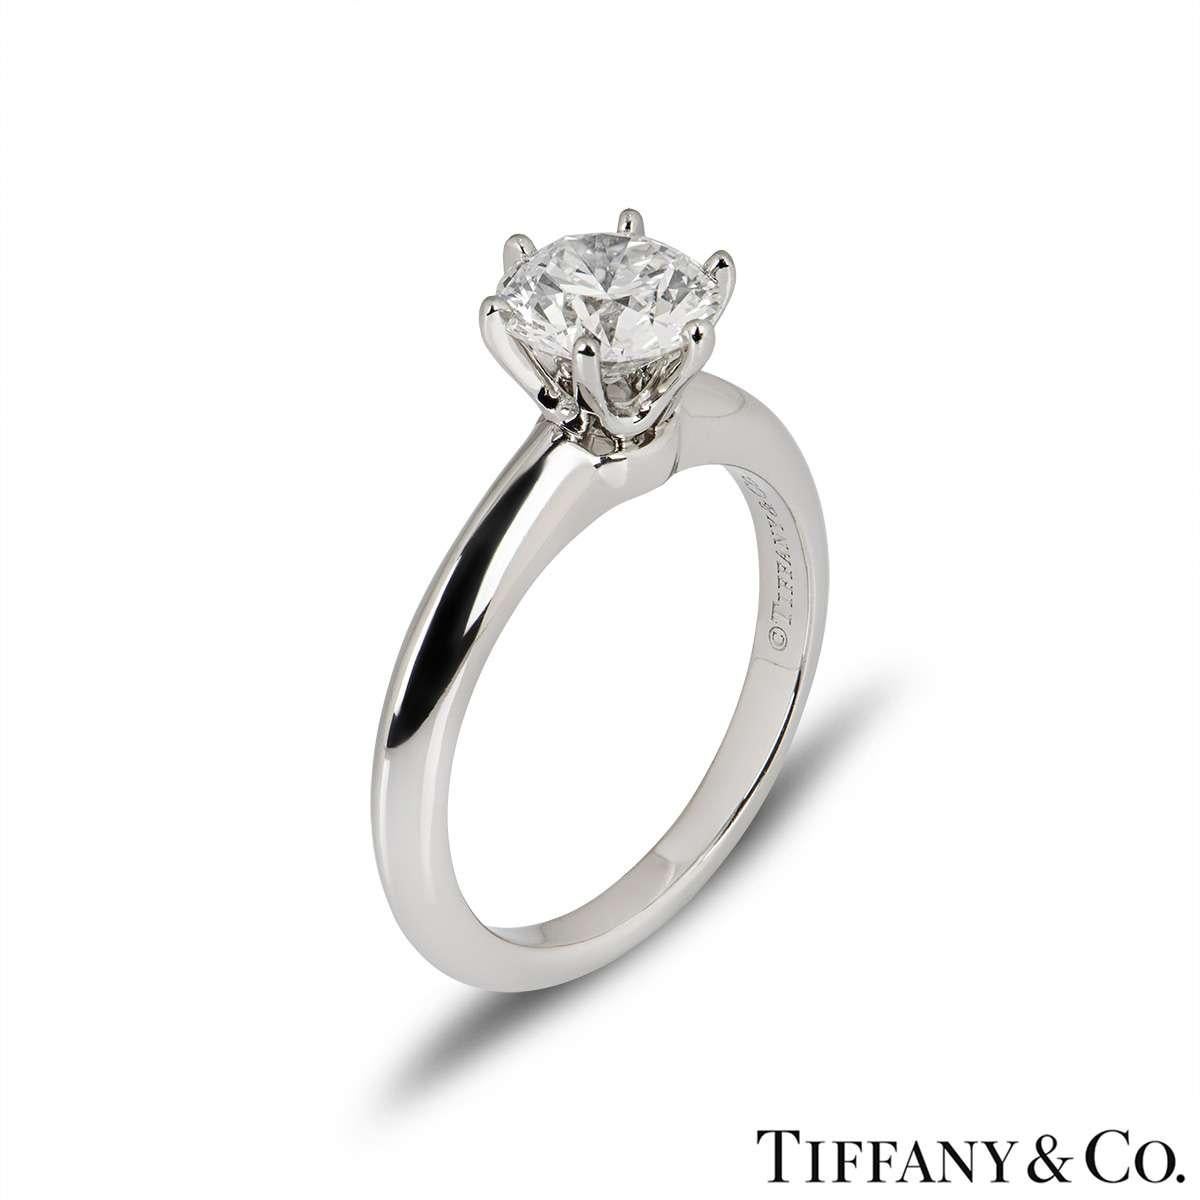 An elegant platinum diamond ring from The Setting collection by Tiffany & Co. The ring comprises of a round brilliant cut diamond in a 6 claw setting with a weight of 1.31ct, H colour and VS1 clarity. The ring is a size UK L½ - EU 51 - US 6 but can